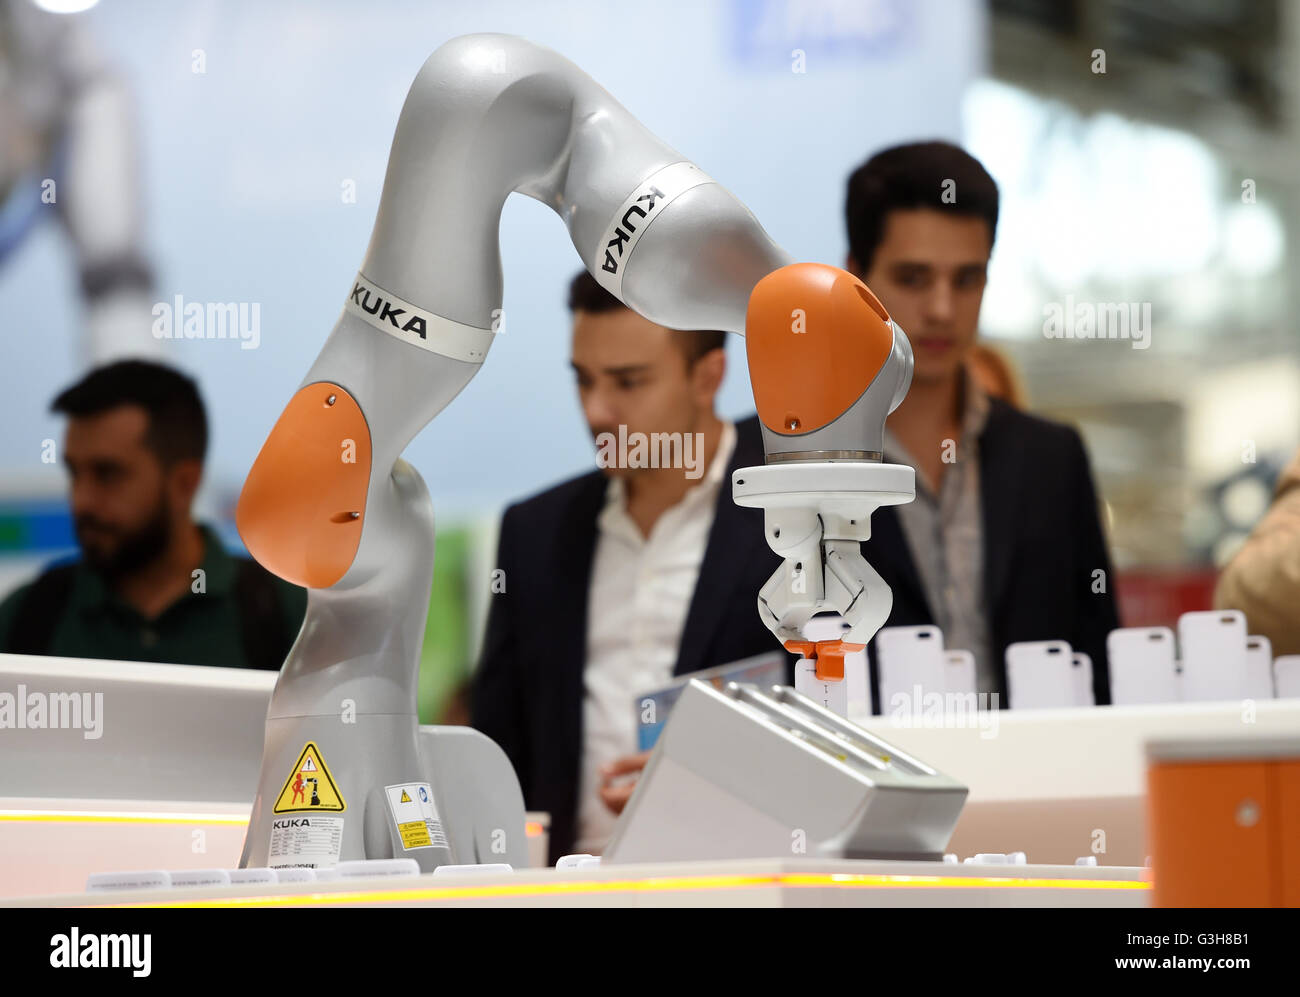 Munich, Germany. 21st June, 2016. Visitors of the robotics fair Automatica look at a roboter at the stall of Kuka in Munich, Germany, 21 June 2016. The fair is open until 24 June 2016. Photo: Tobias Hase/dpa/Alamy Live News Stock Photo